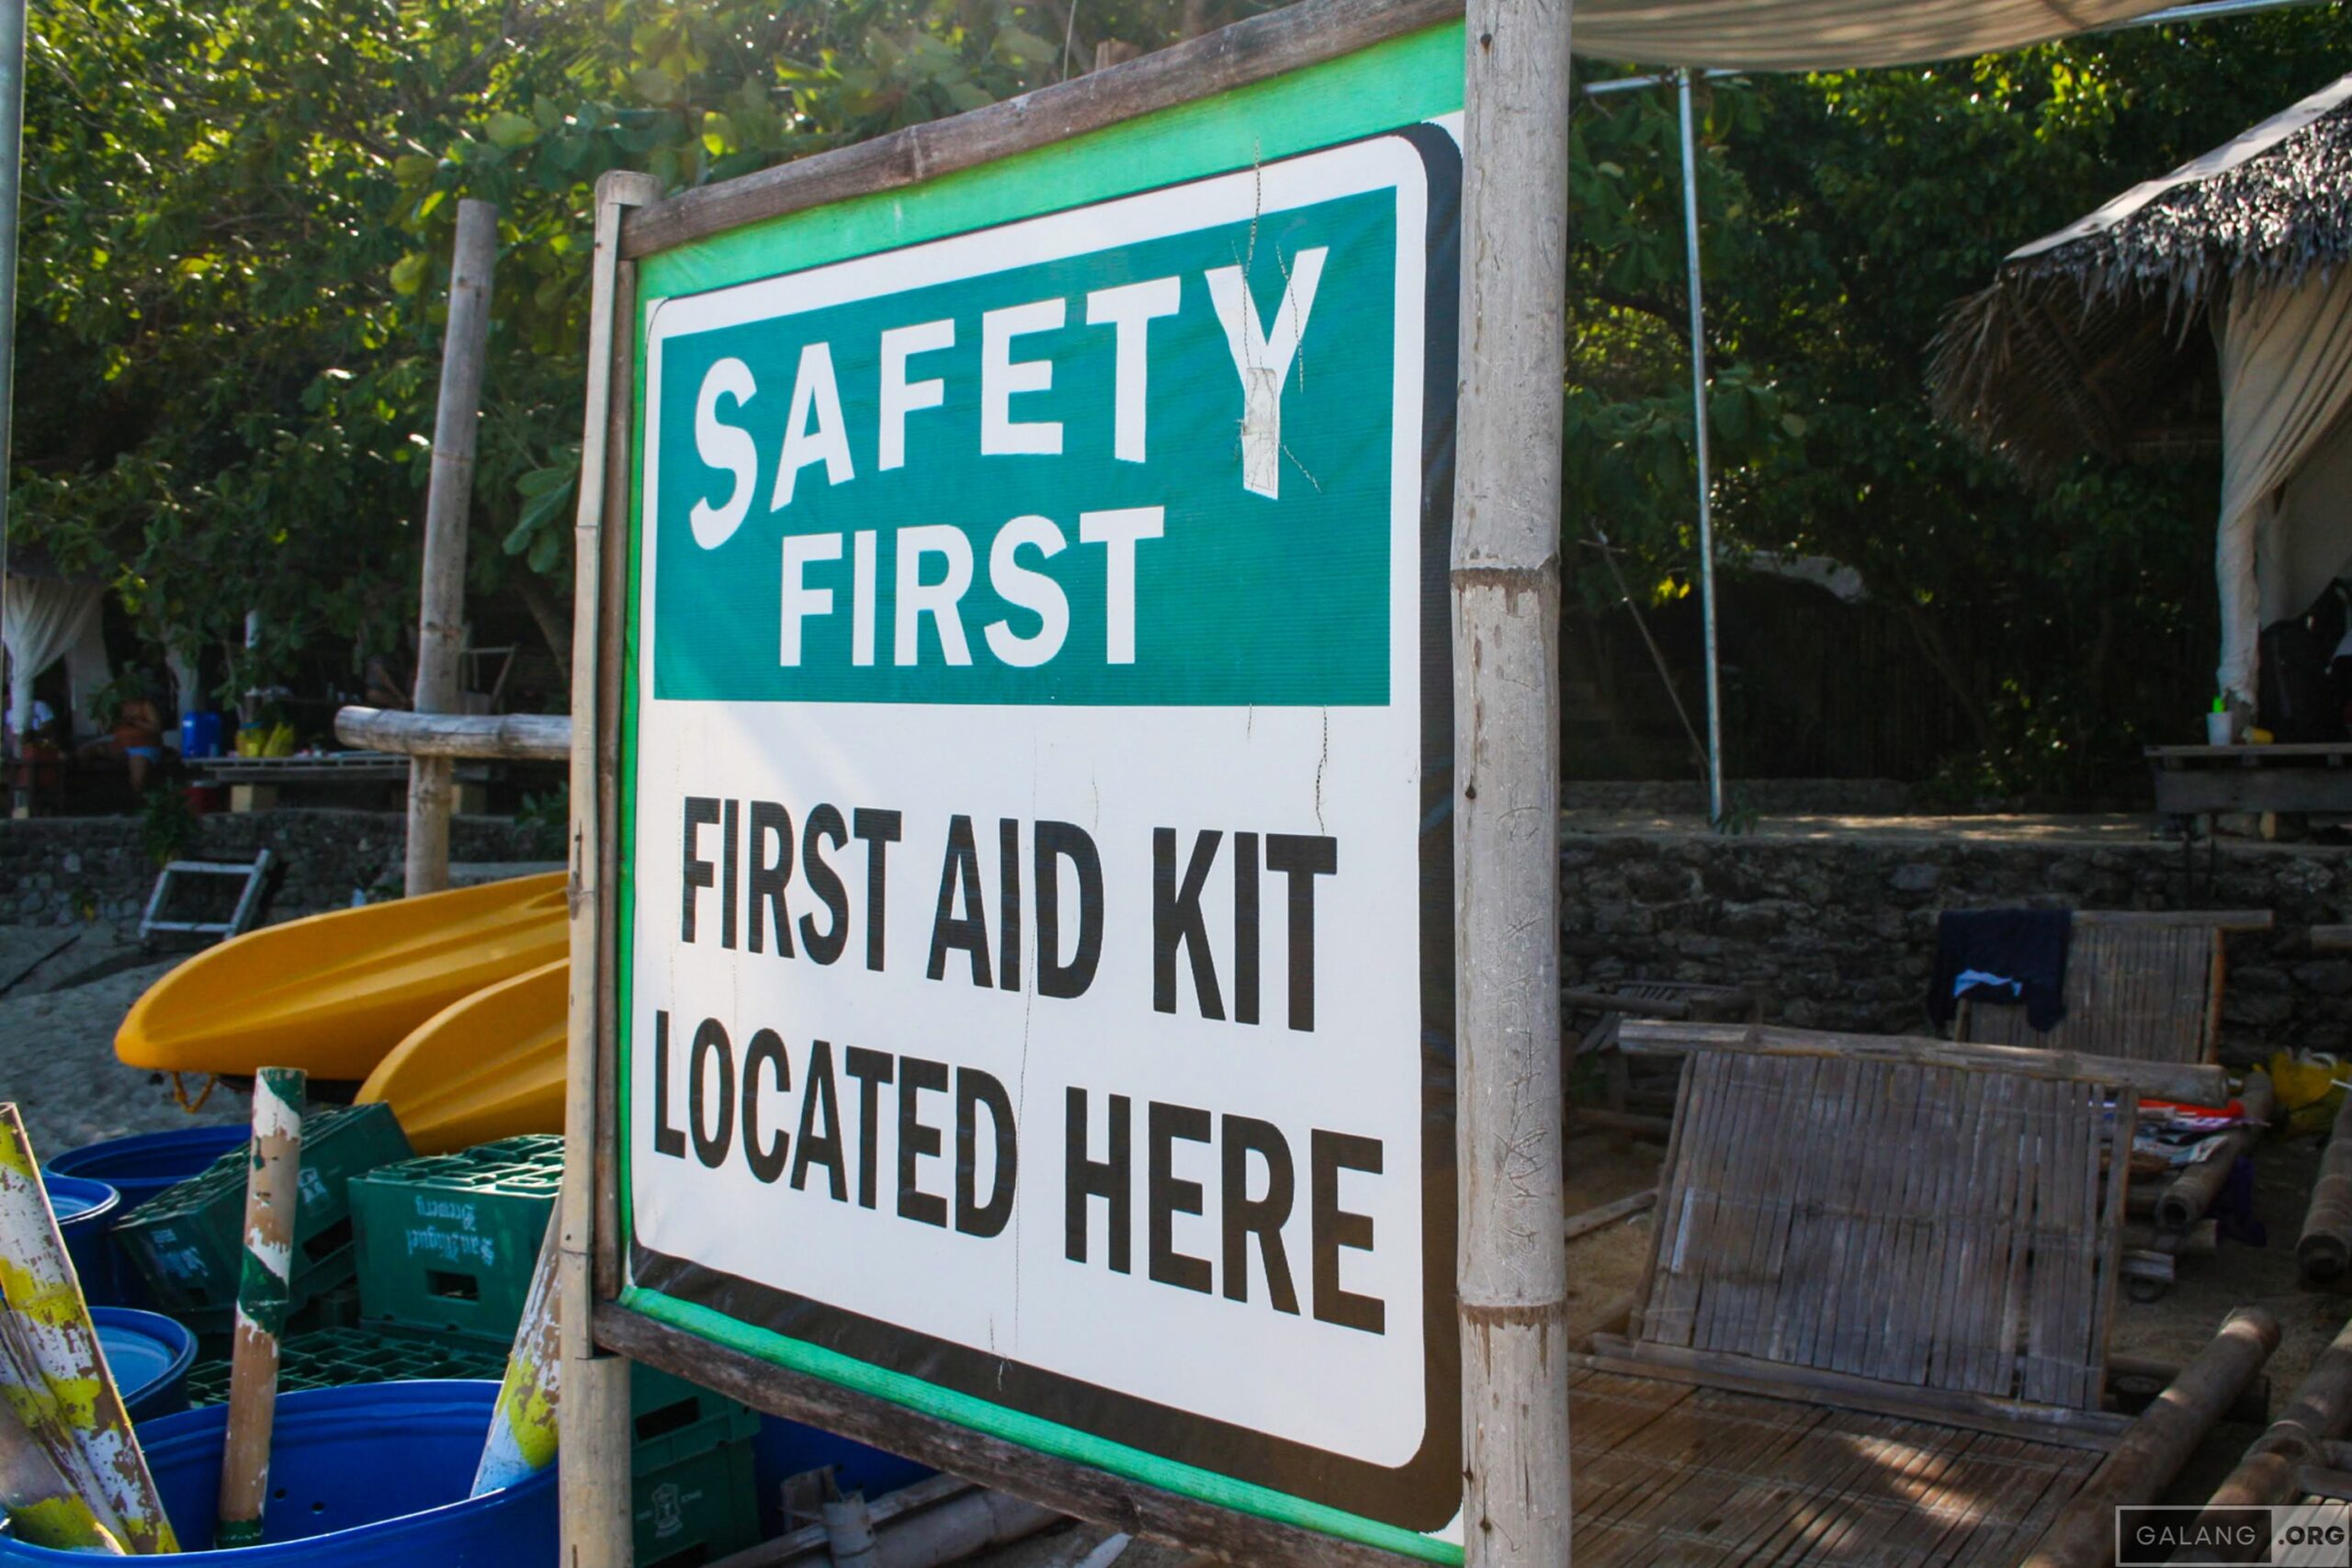 “Safety First. First Aid Kit Located Here” (Where?)